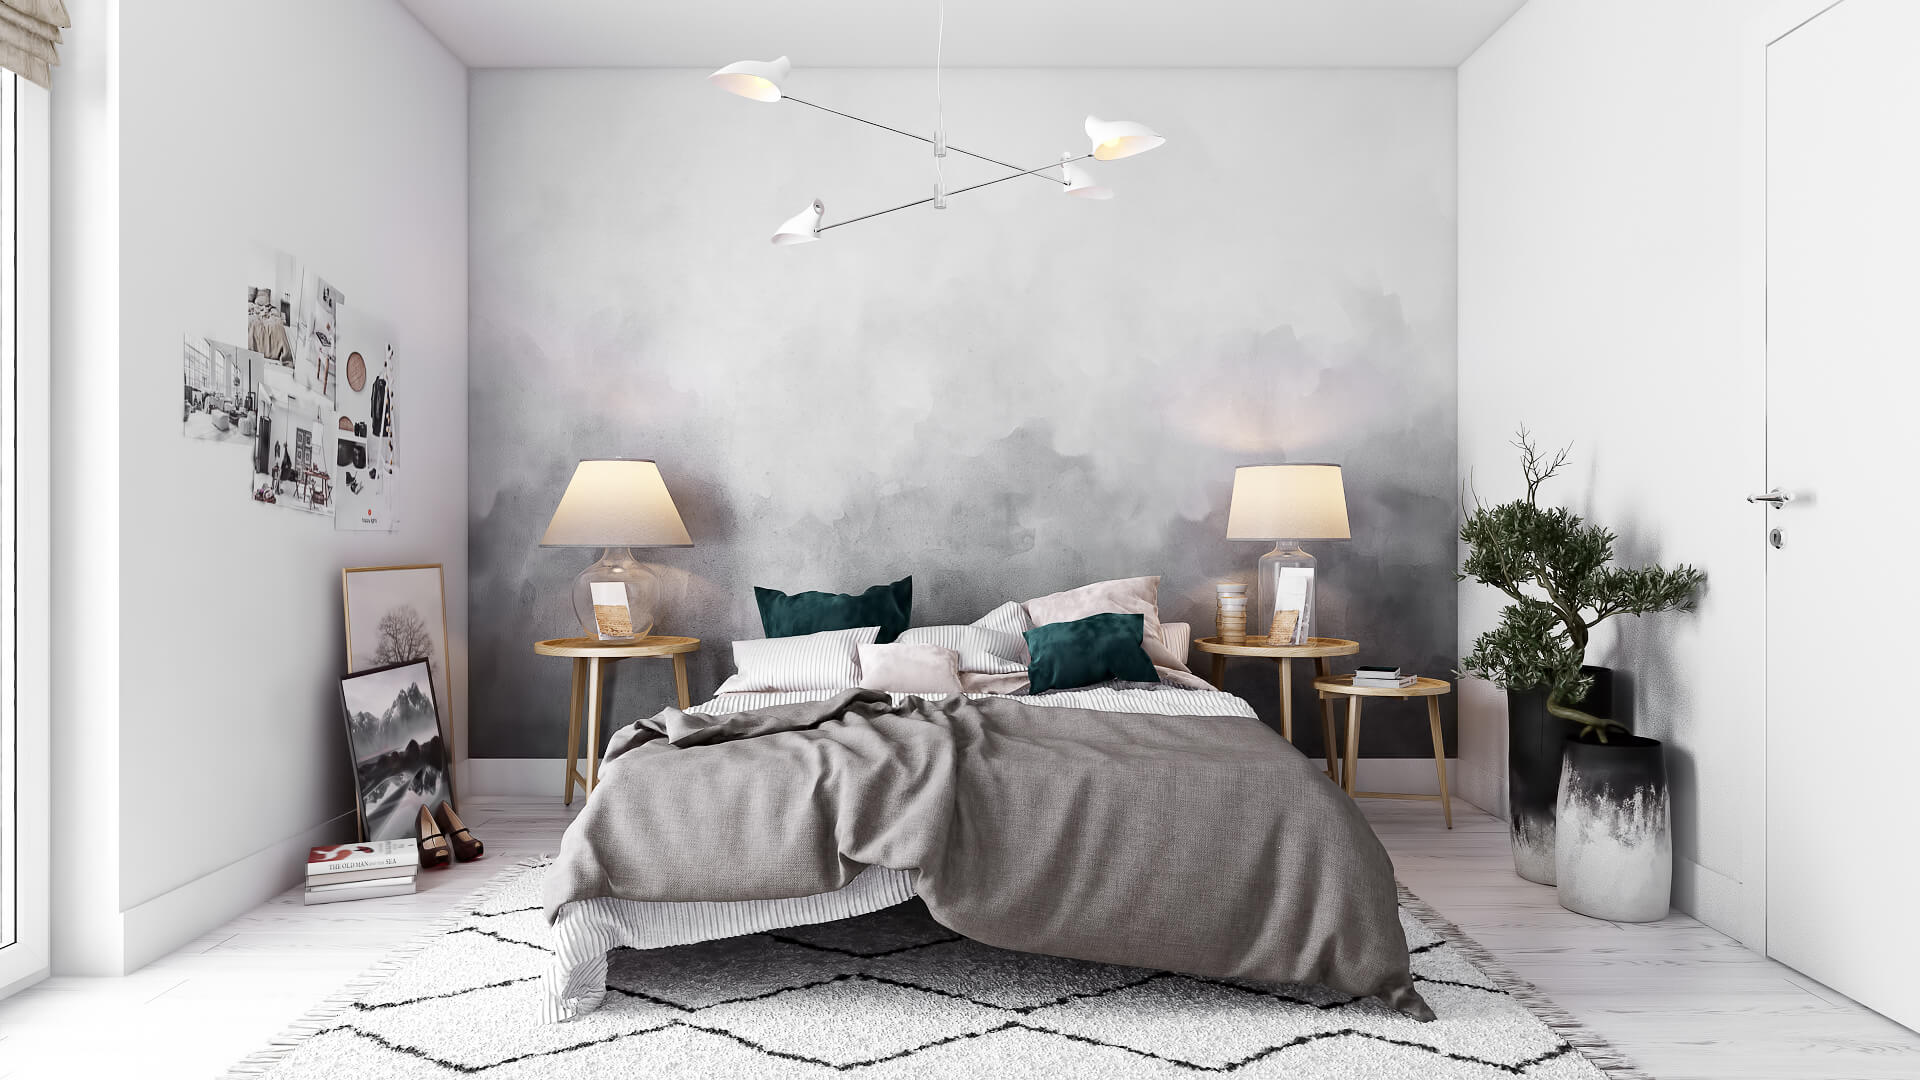 A CG Rendering Showing a Stylish Bedroom Interior